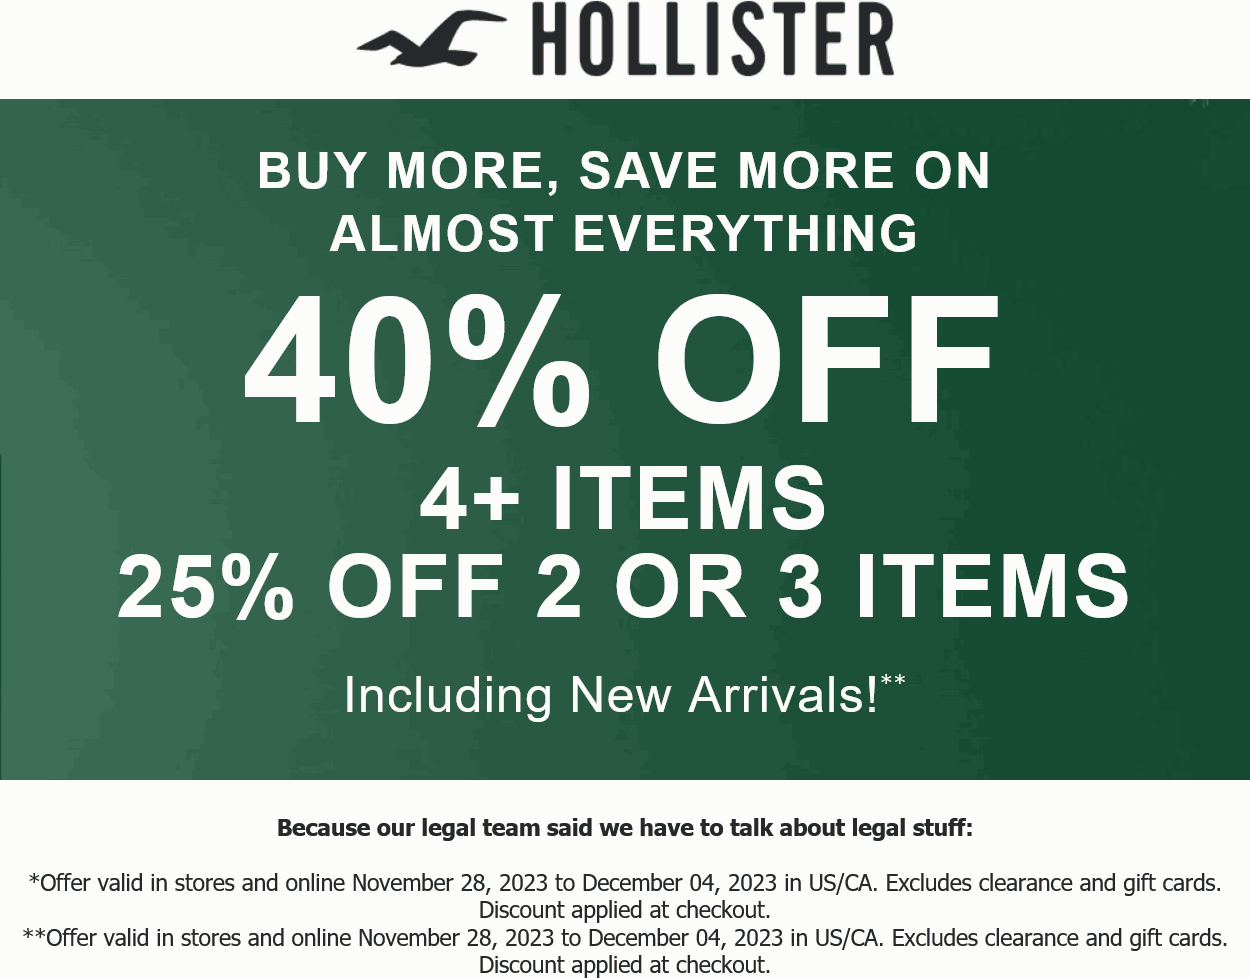 Hollister stores Coupon  25-40% off 2+ items at Hollister, ditto online #hollister 